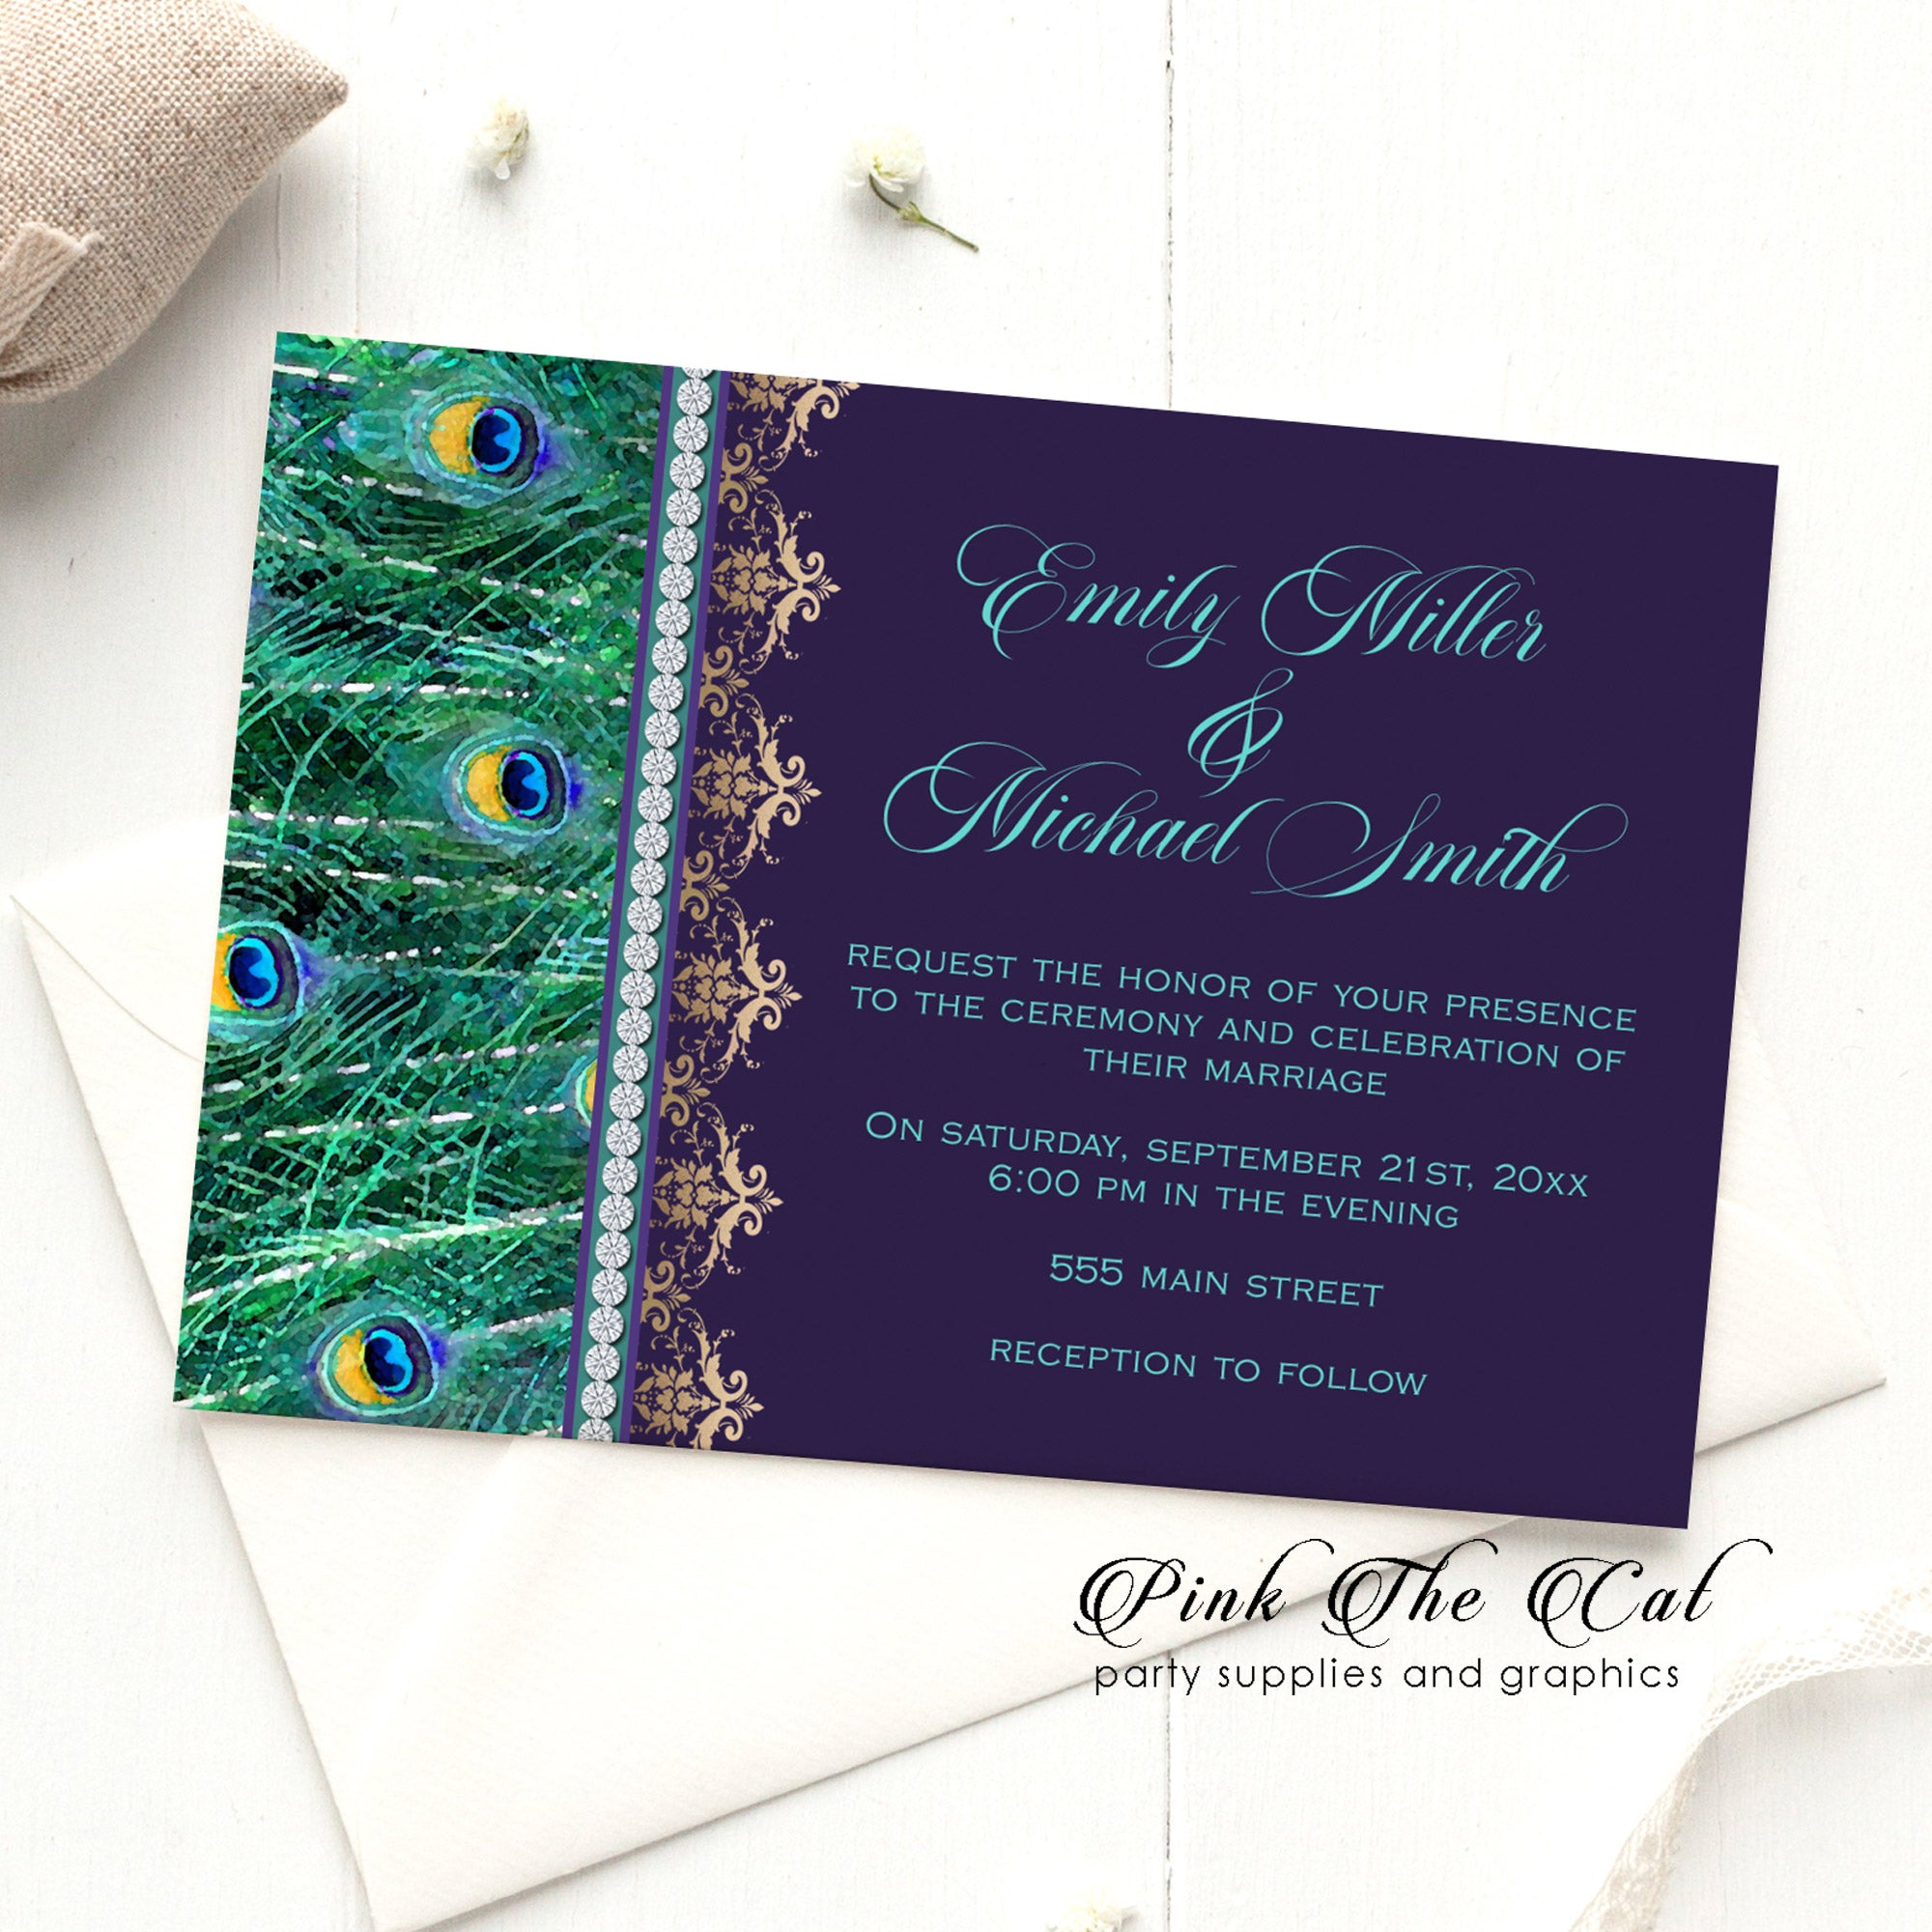 100 Peacock feathers and diamond wedding invitations with envelopes